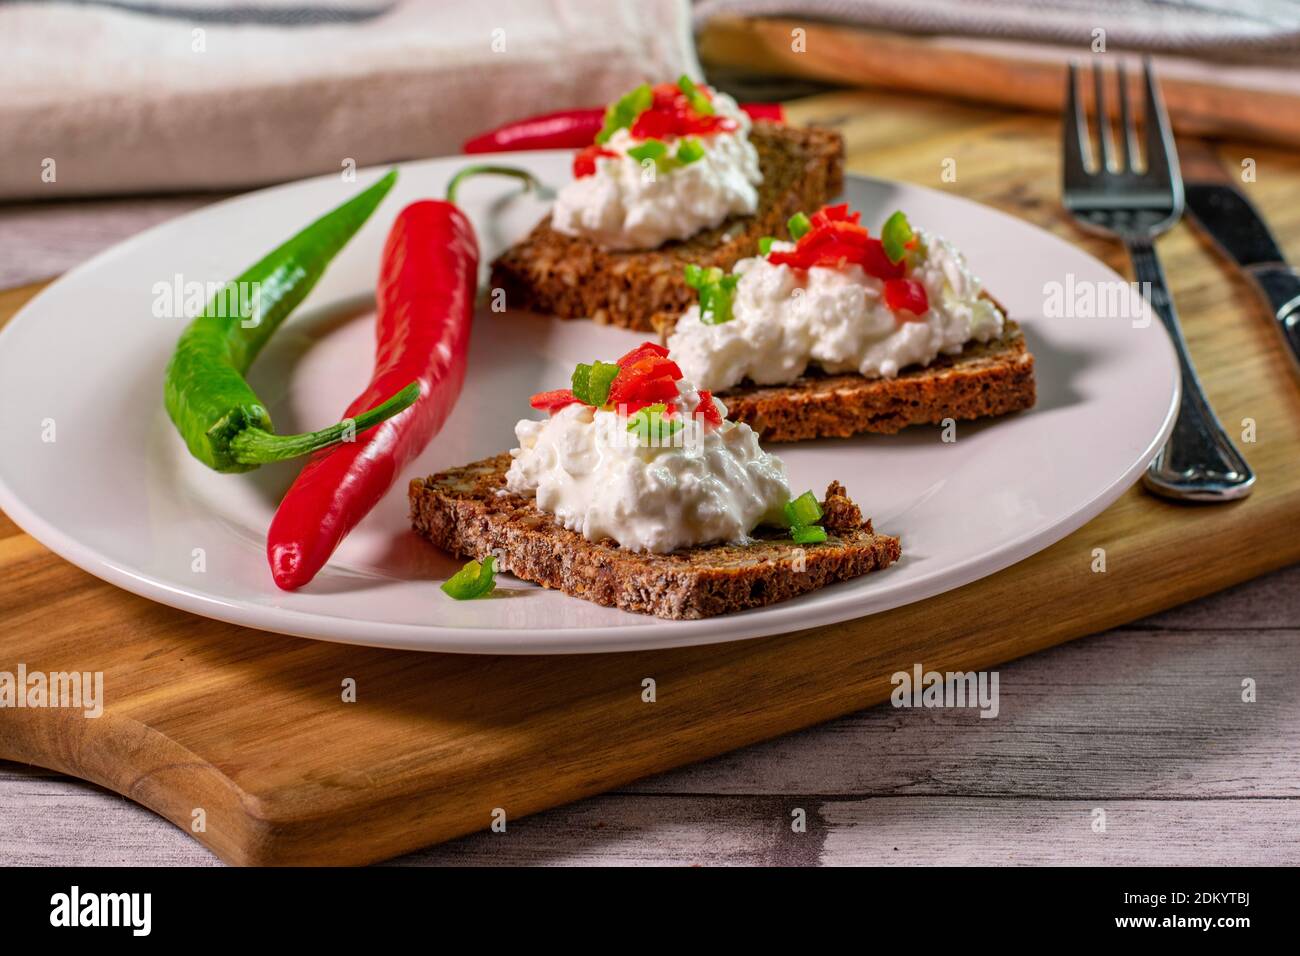 open sandwich with cottage cheese and pepperoni served on a plate Stock Photo